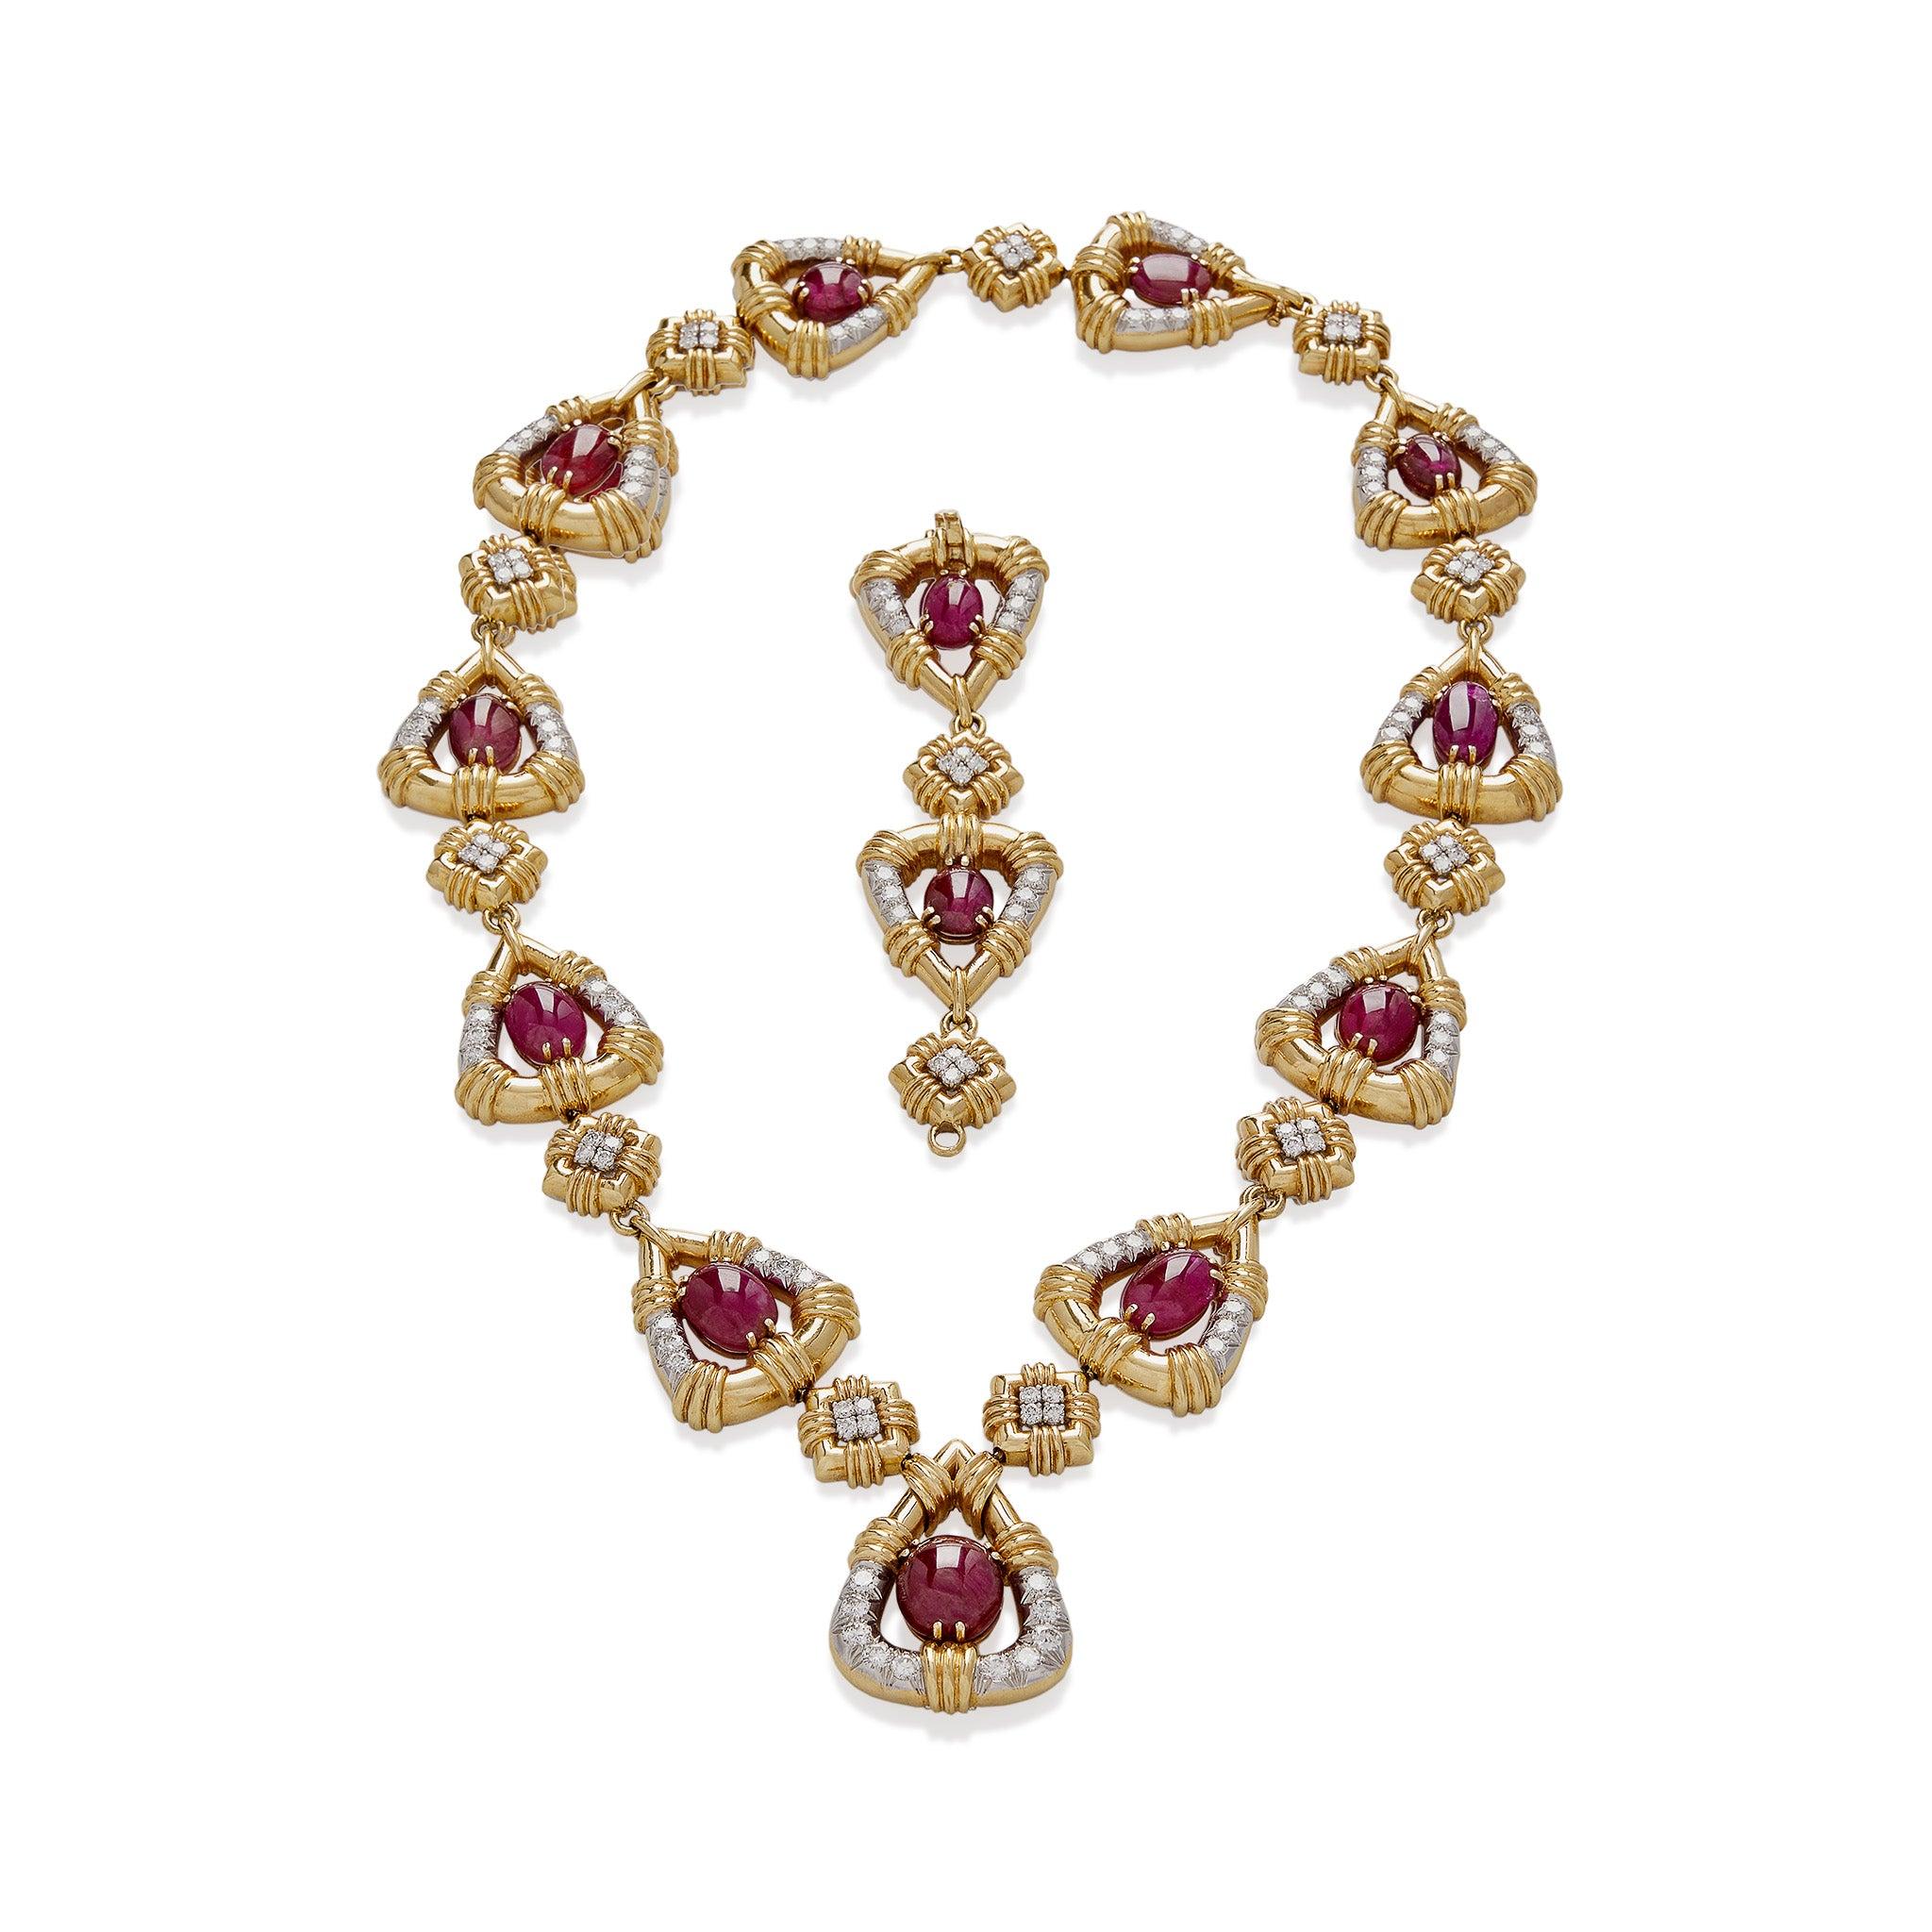 Created in the 1980s, this 18K gold David Webb necklace and bracelet of multiple conversions is set with approximately 110 carats of large cabochon rubies and 15 carats of diamonds. It is composed of tear-drop form ribbed and textured gold links